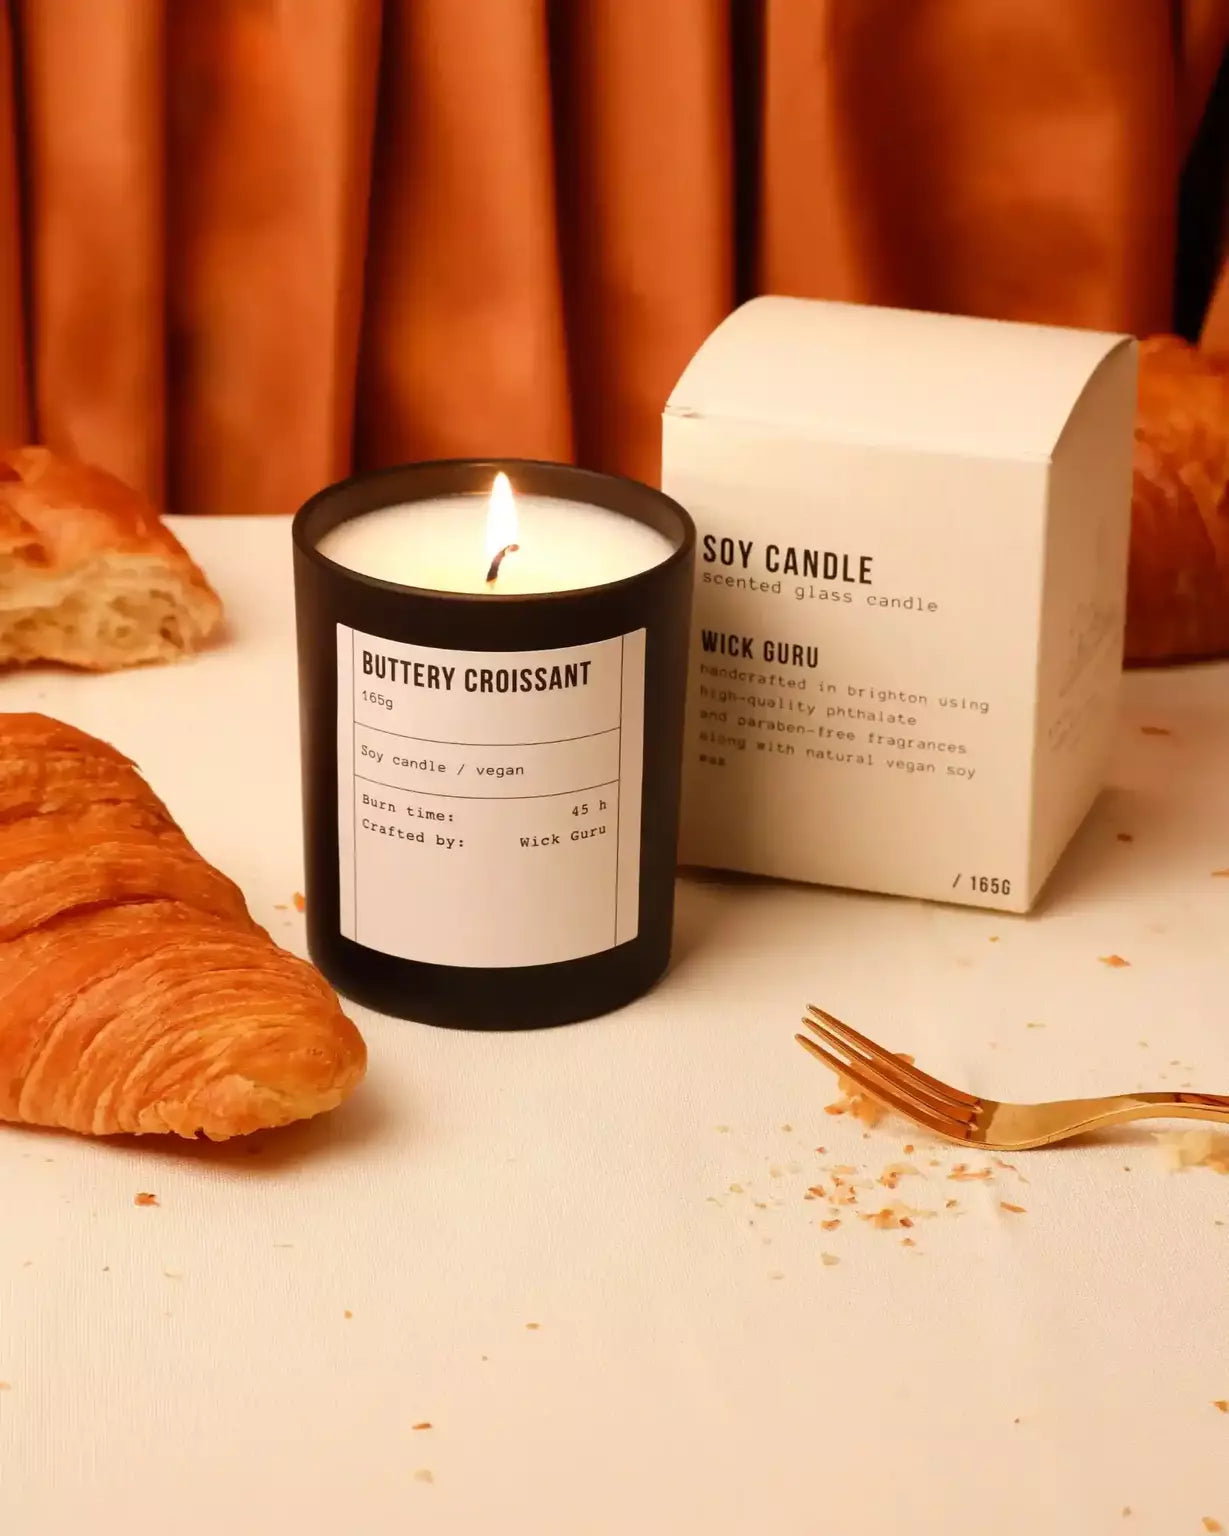 Buttery Croissant Candle | Milk + Butter + Vanilla